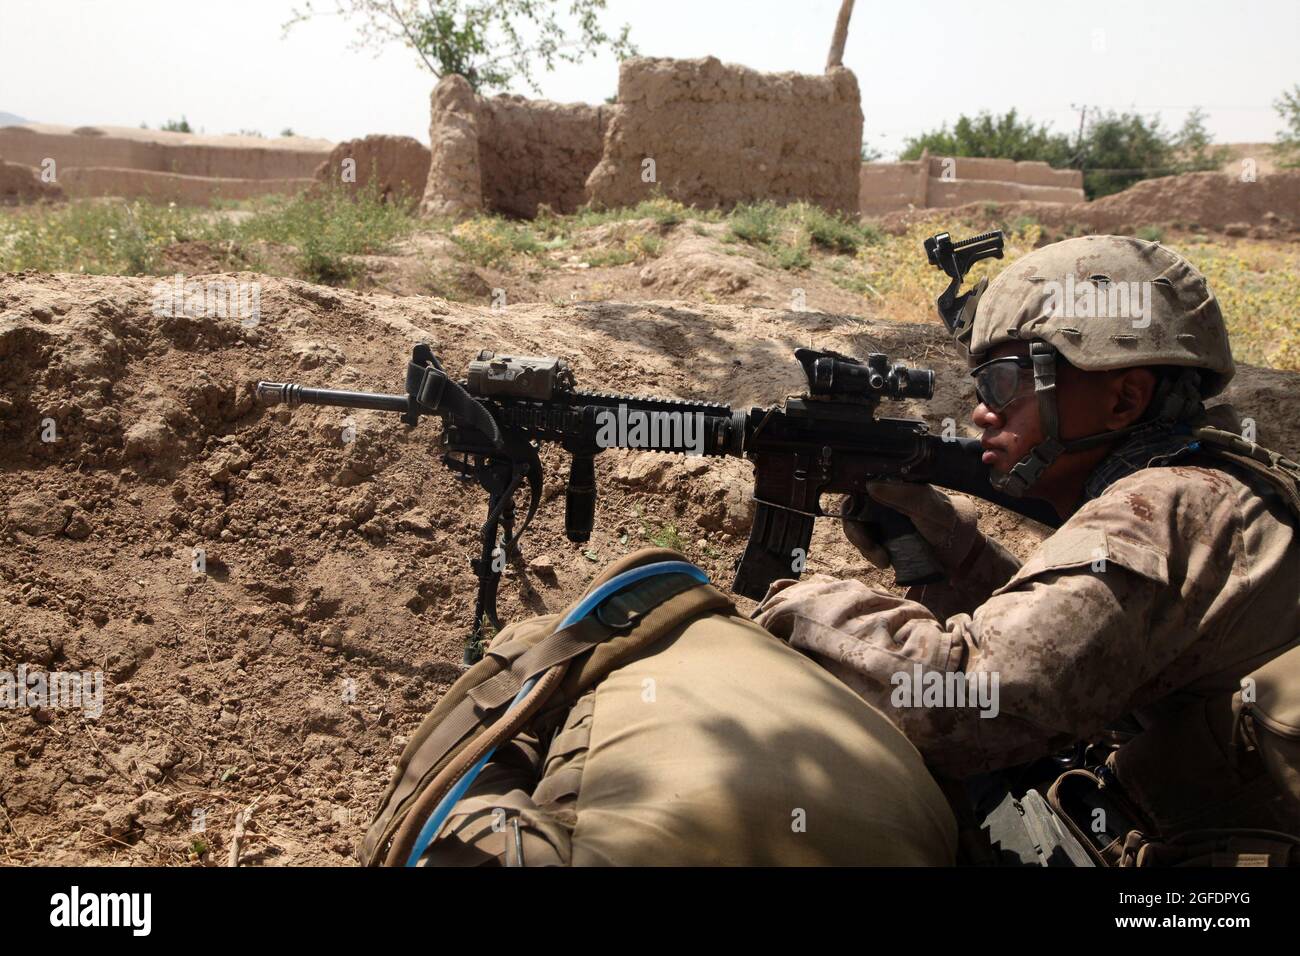 U.S. Marine Corps Lance Cpl. Christopher Ek with Fox Company, 2nd Battalion, 5th Marine Regiment, Regimental Combat Team 6 provides security while patrolling to an objective during Operation Branding Iron II in the Ghaysarkah region, Helmand province, Afghanistan June 21, 2012. Marines conducted the operation to disrupt enemy logistics and deny the enemy freedom of movement. (U.S. Marine Corps photo by Lance Cpl. Ismael E. Ortega/ Released) Stock Photo